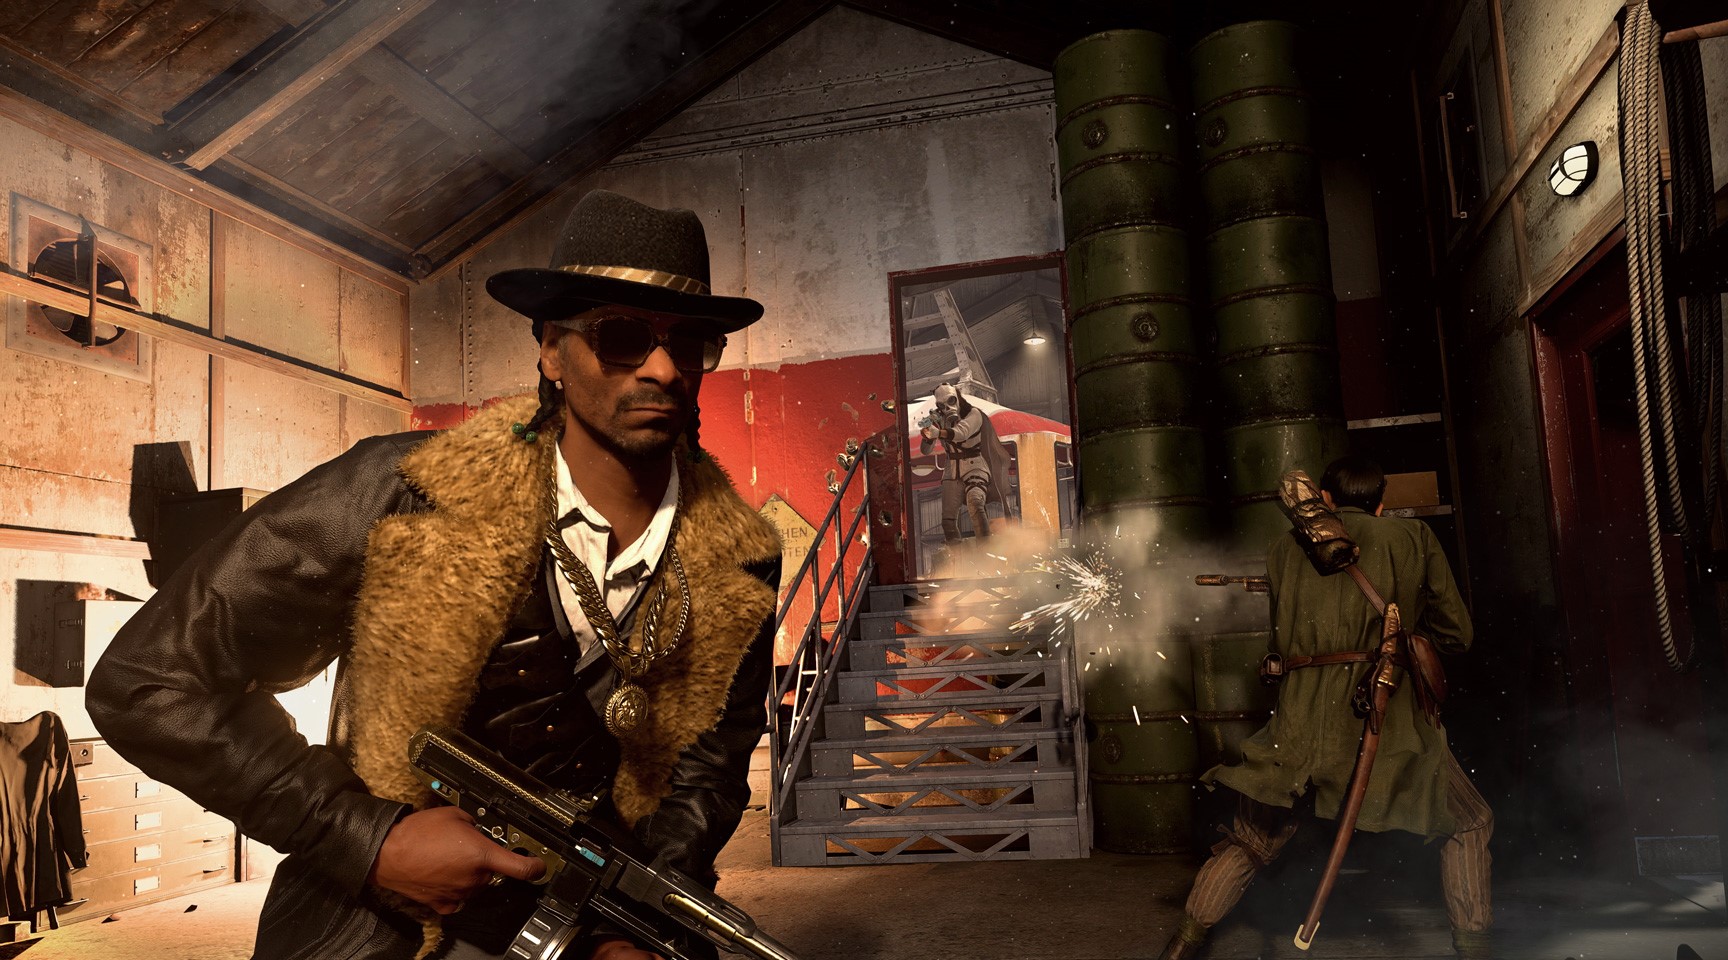 Snoop Dogg in Warzone.